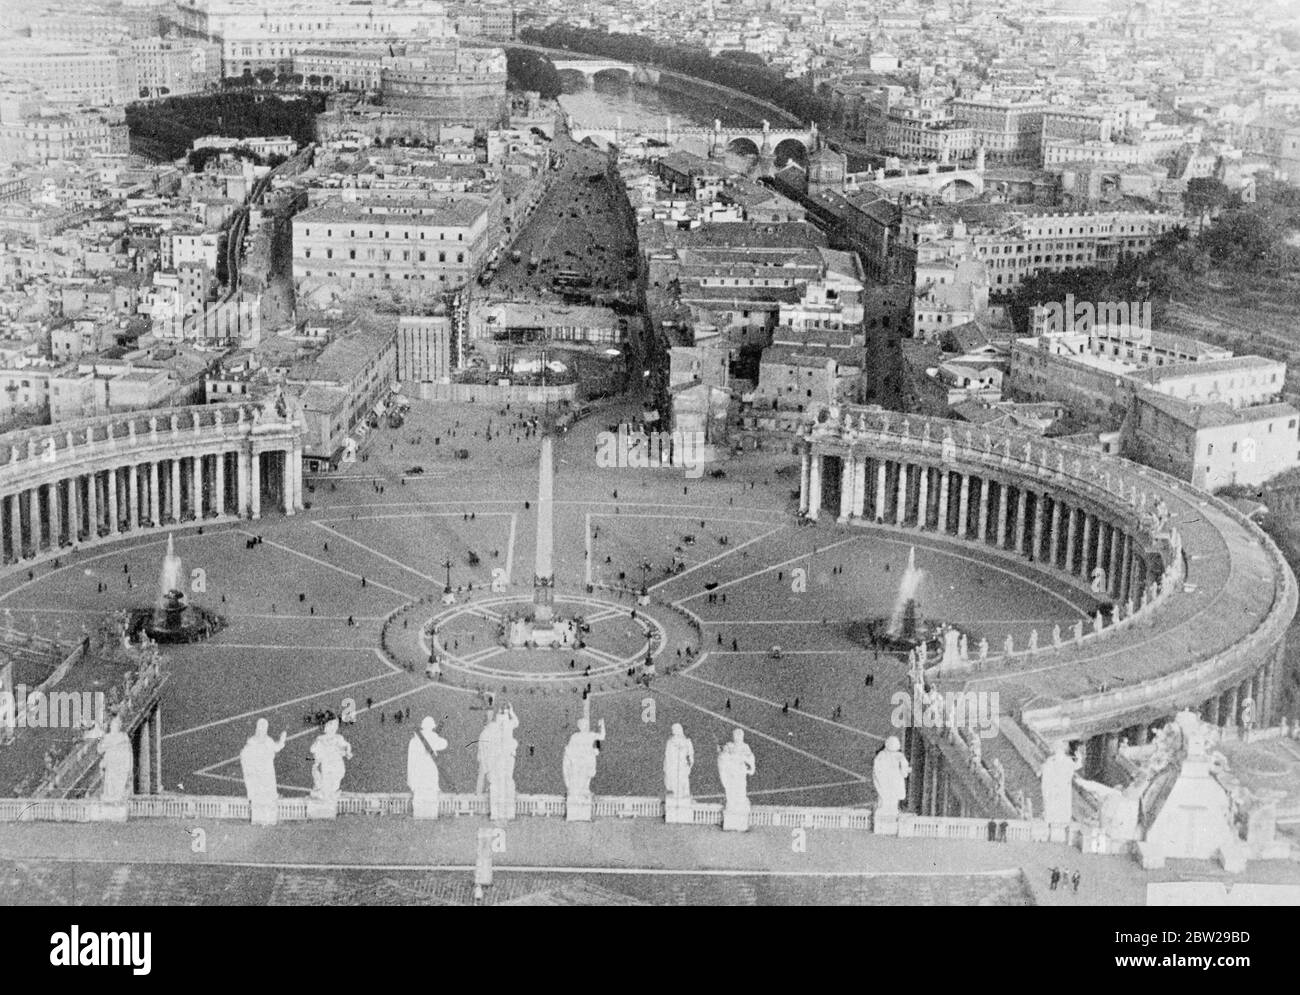 New glories for the 'Eternal City'. A new panorama of Rome, seen from the copula of St Peter's. Below is the Piazza S Pietro and the broad thoroughfare leading out of it is Rome's greatest improvement. It was made by the demolition of the famous Spina di Borgo, the disappearance of many buildings converting to Street into one. The great new artery gives direct connection between the Piazza S Pietro Andover Castel S Angelo district. 18 October 1937 Stock Photo